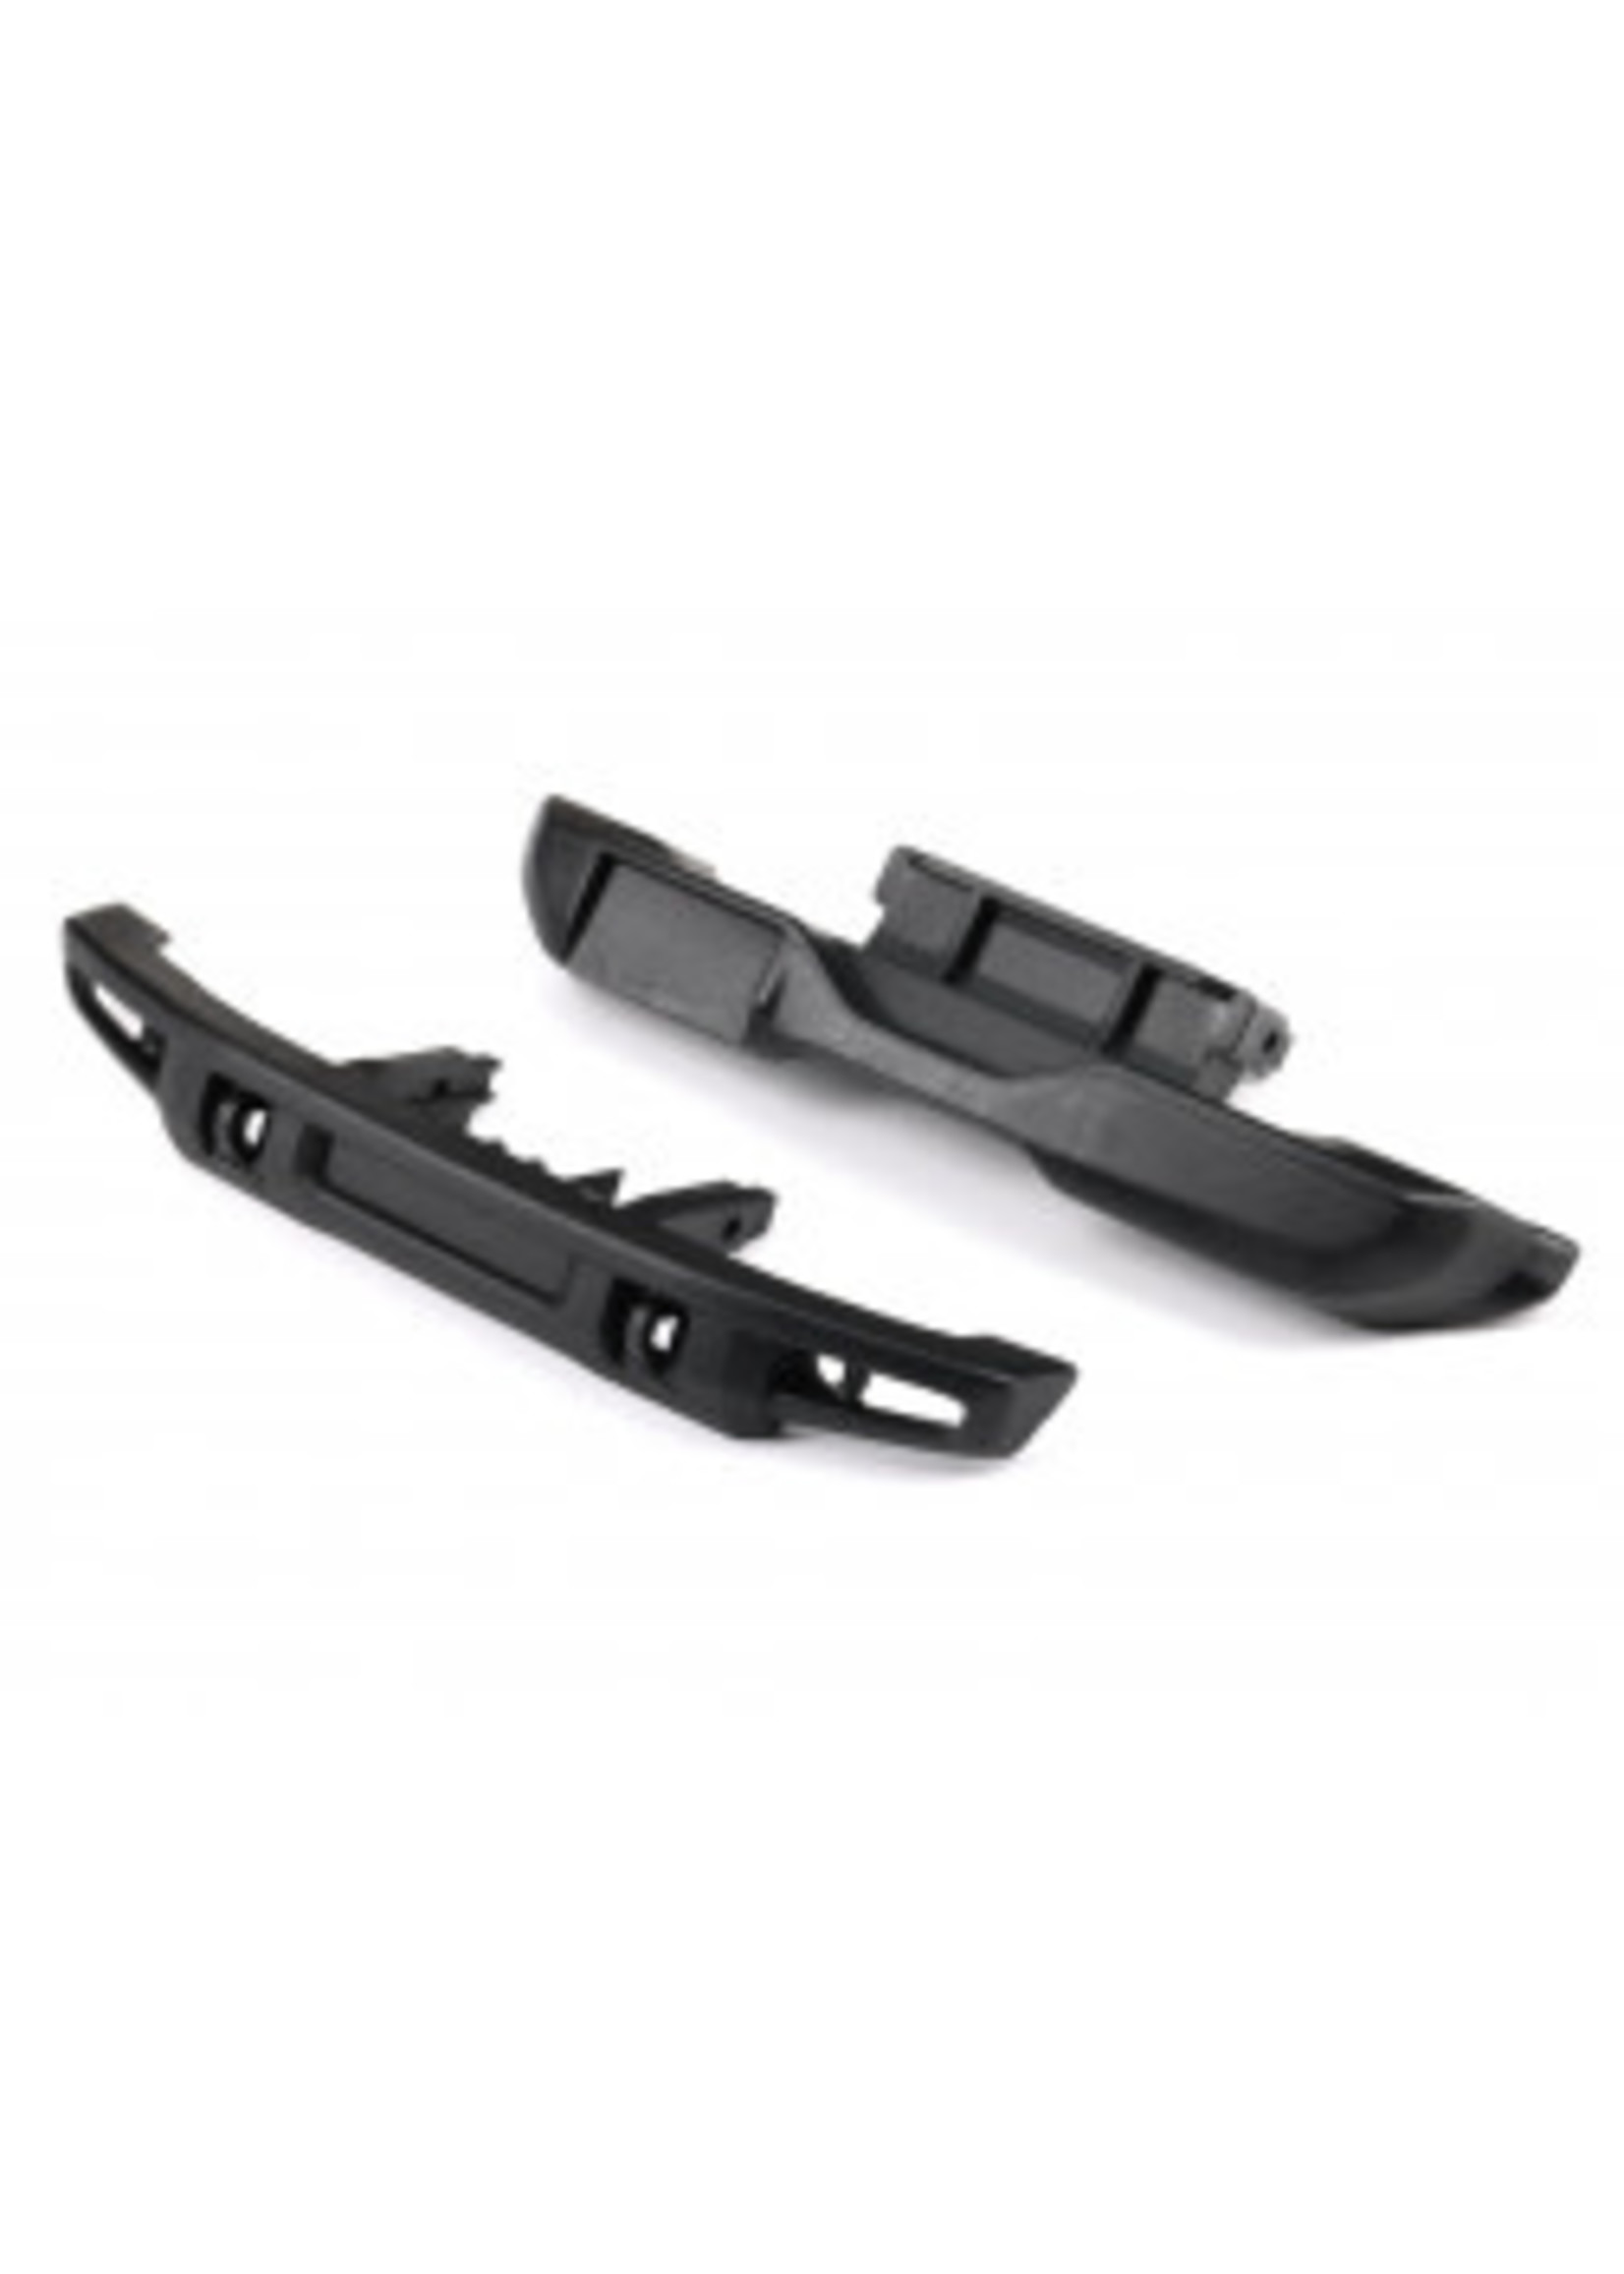 Traxxas 9735 Bumpers Front and Rear